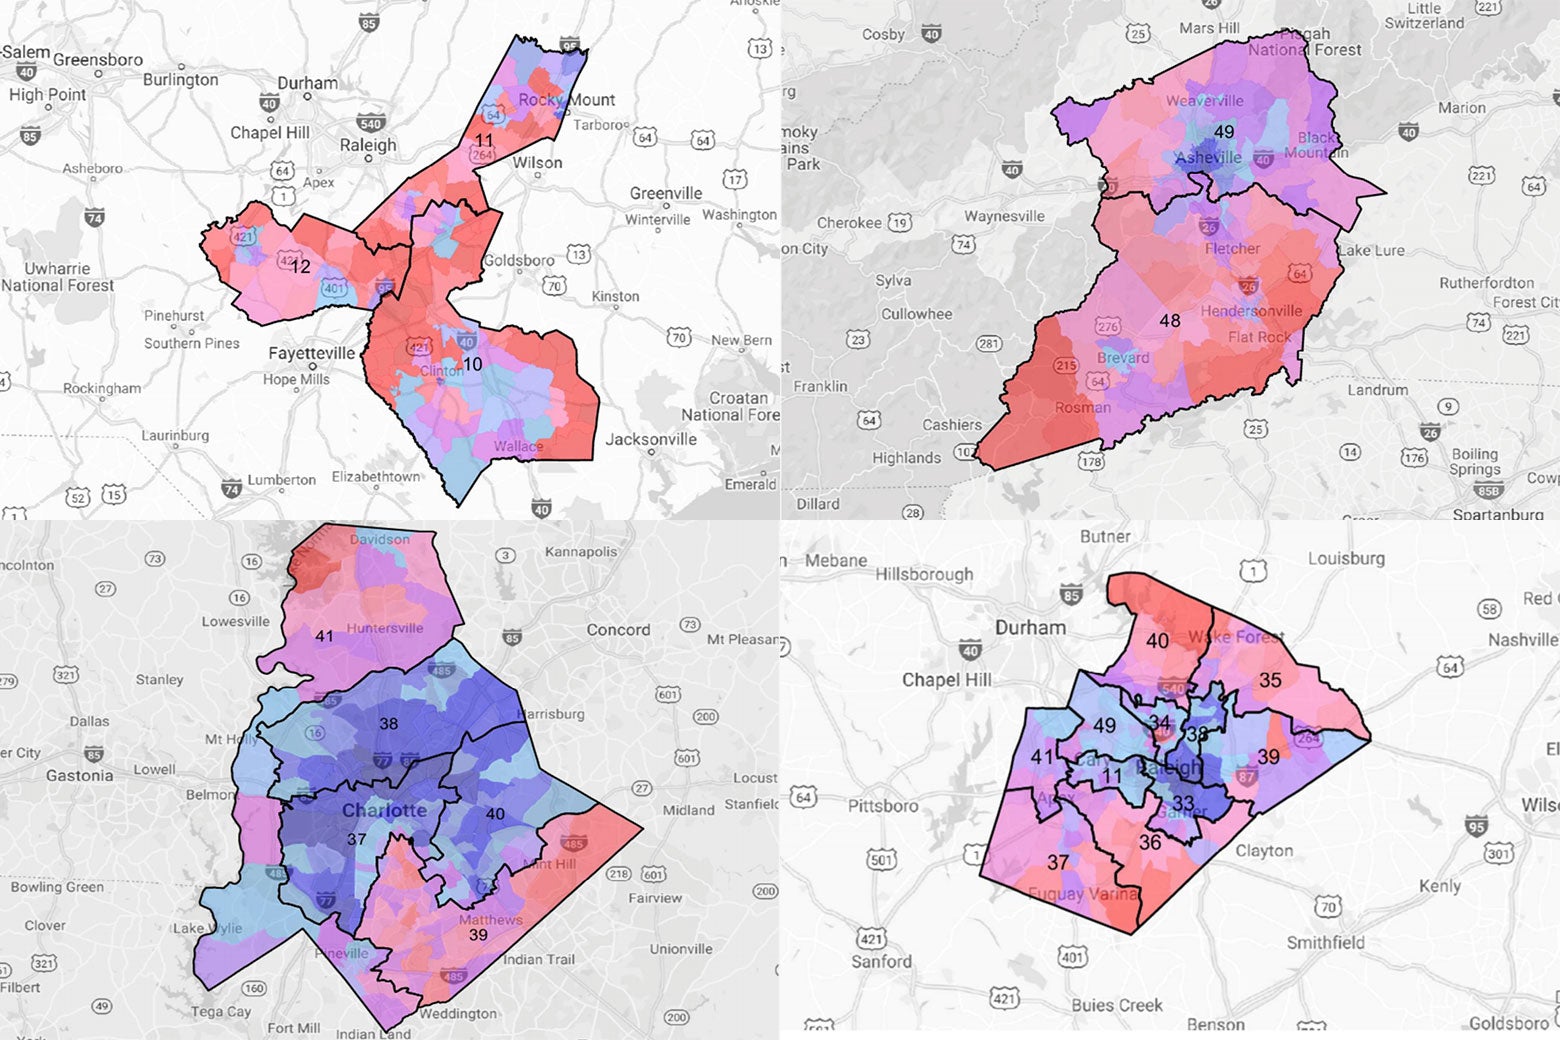 Maps of gerrymandered North Carolina districts. There are four images: From top left, three districts near Fayetteville; top right, two districts encompassing areas near Asheville; bottom right contains districts surrounding Raleigh; and bottom left contains several districts surrounding Charlotte.